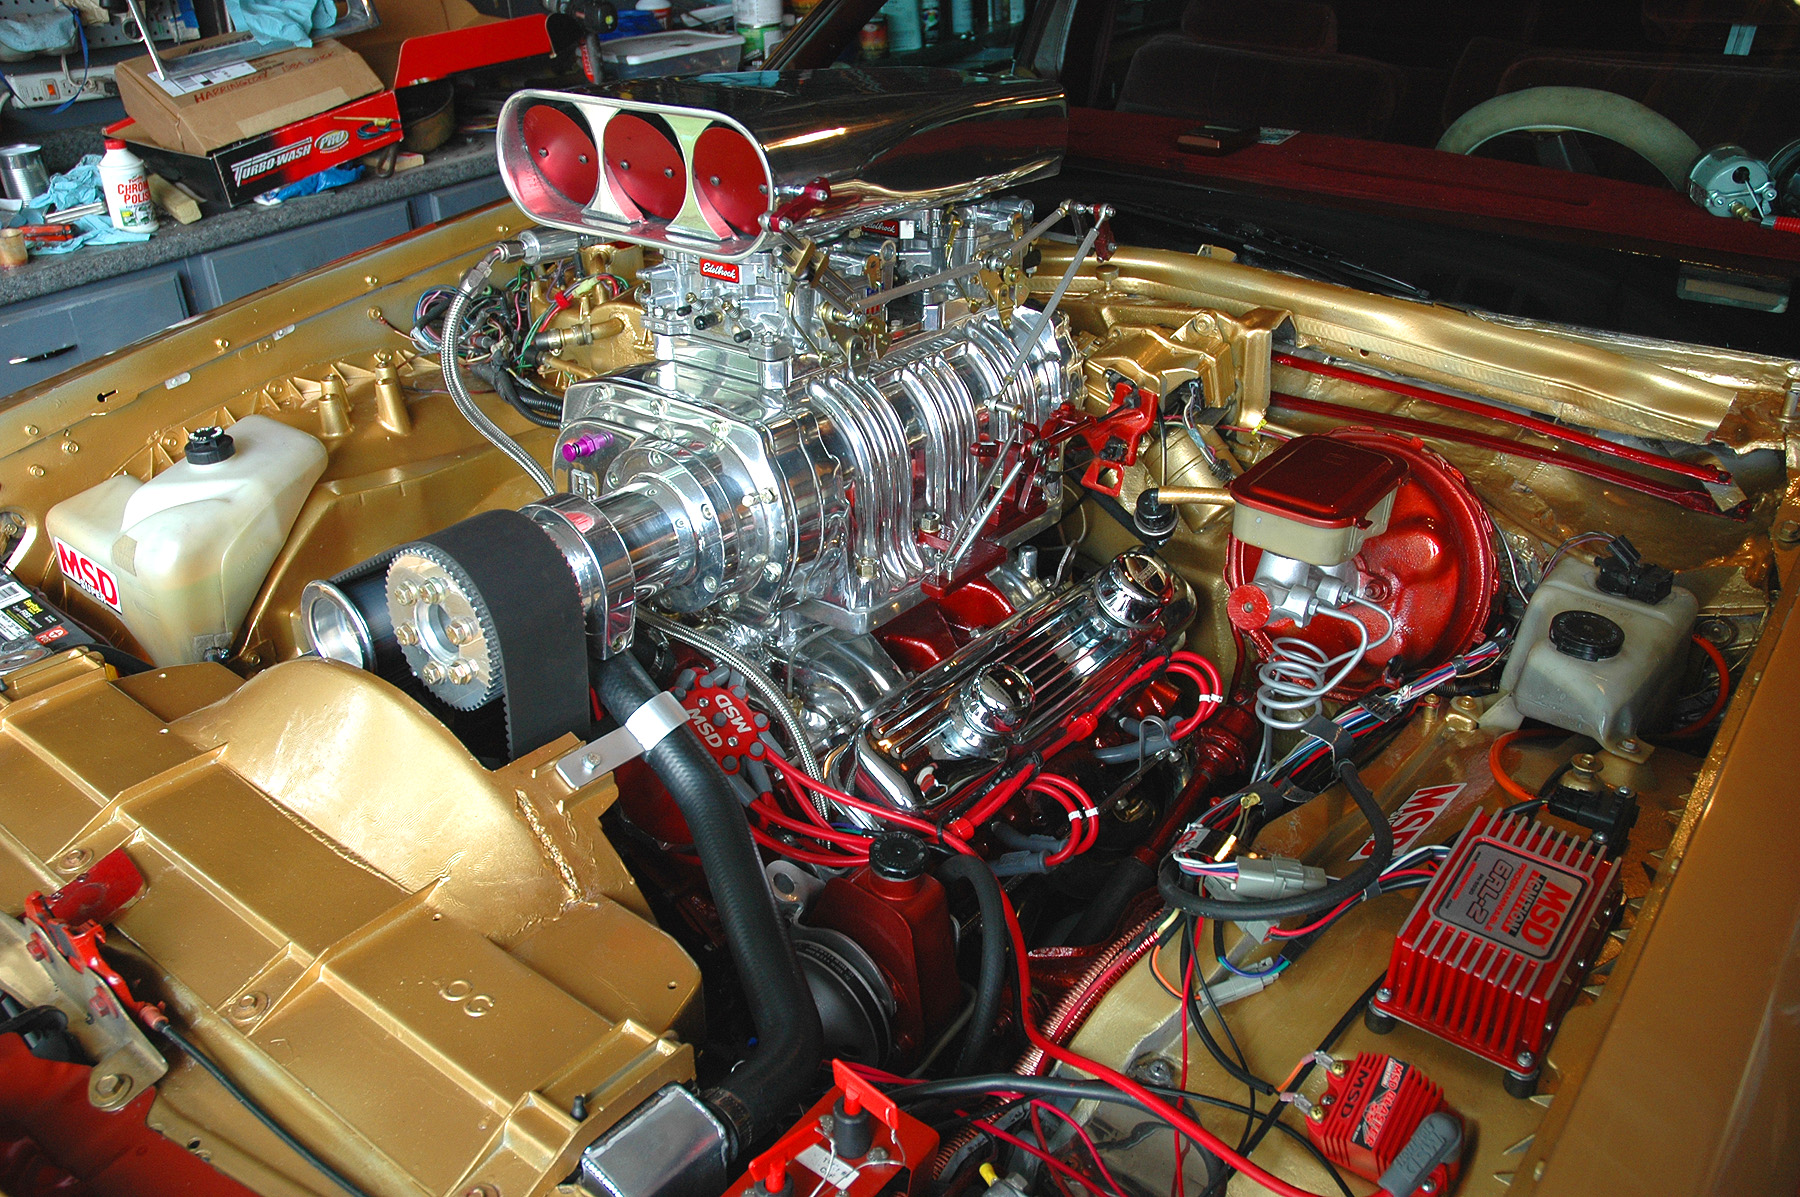 buick-view-of-supercharged-8-liter-engine-8705.jpg